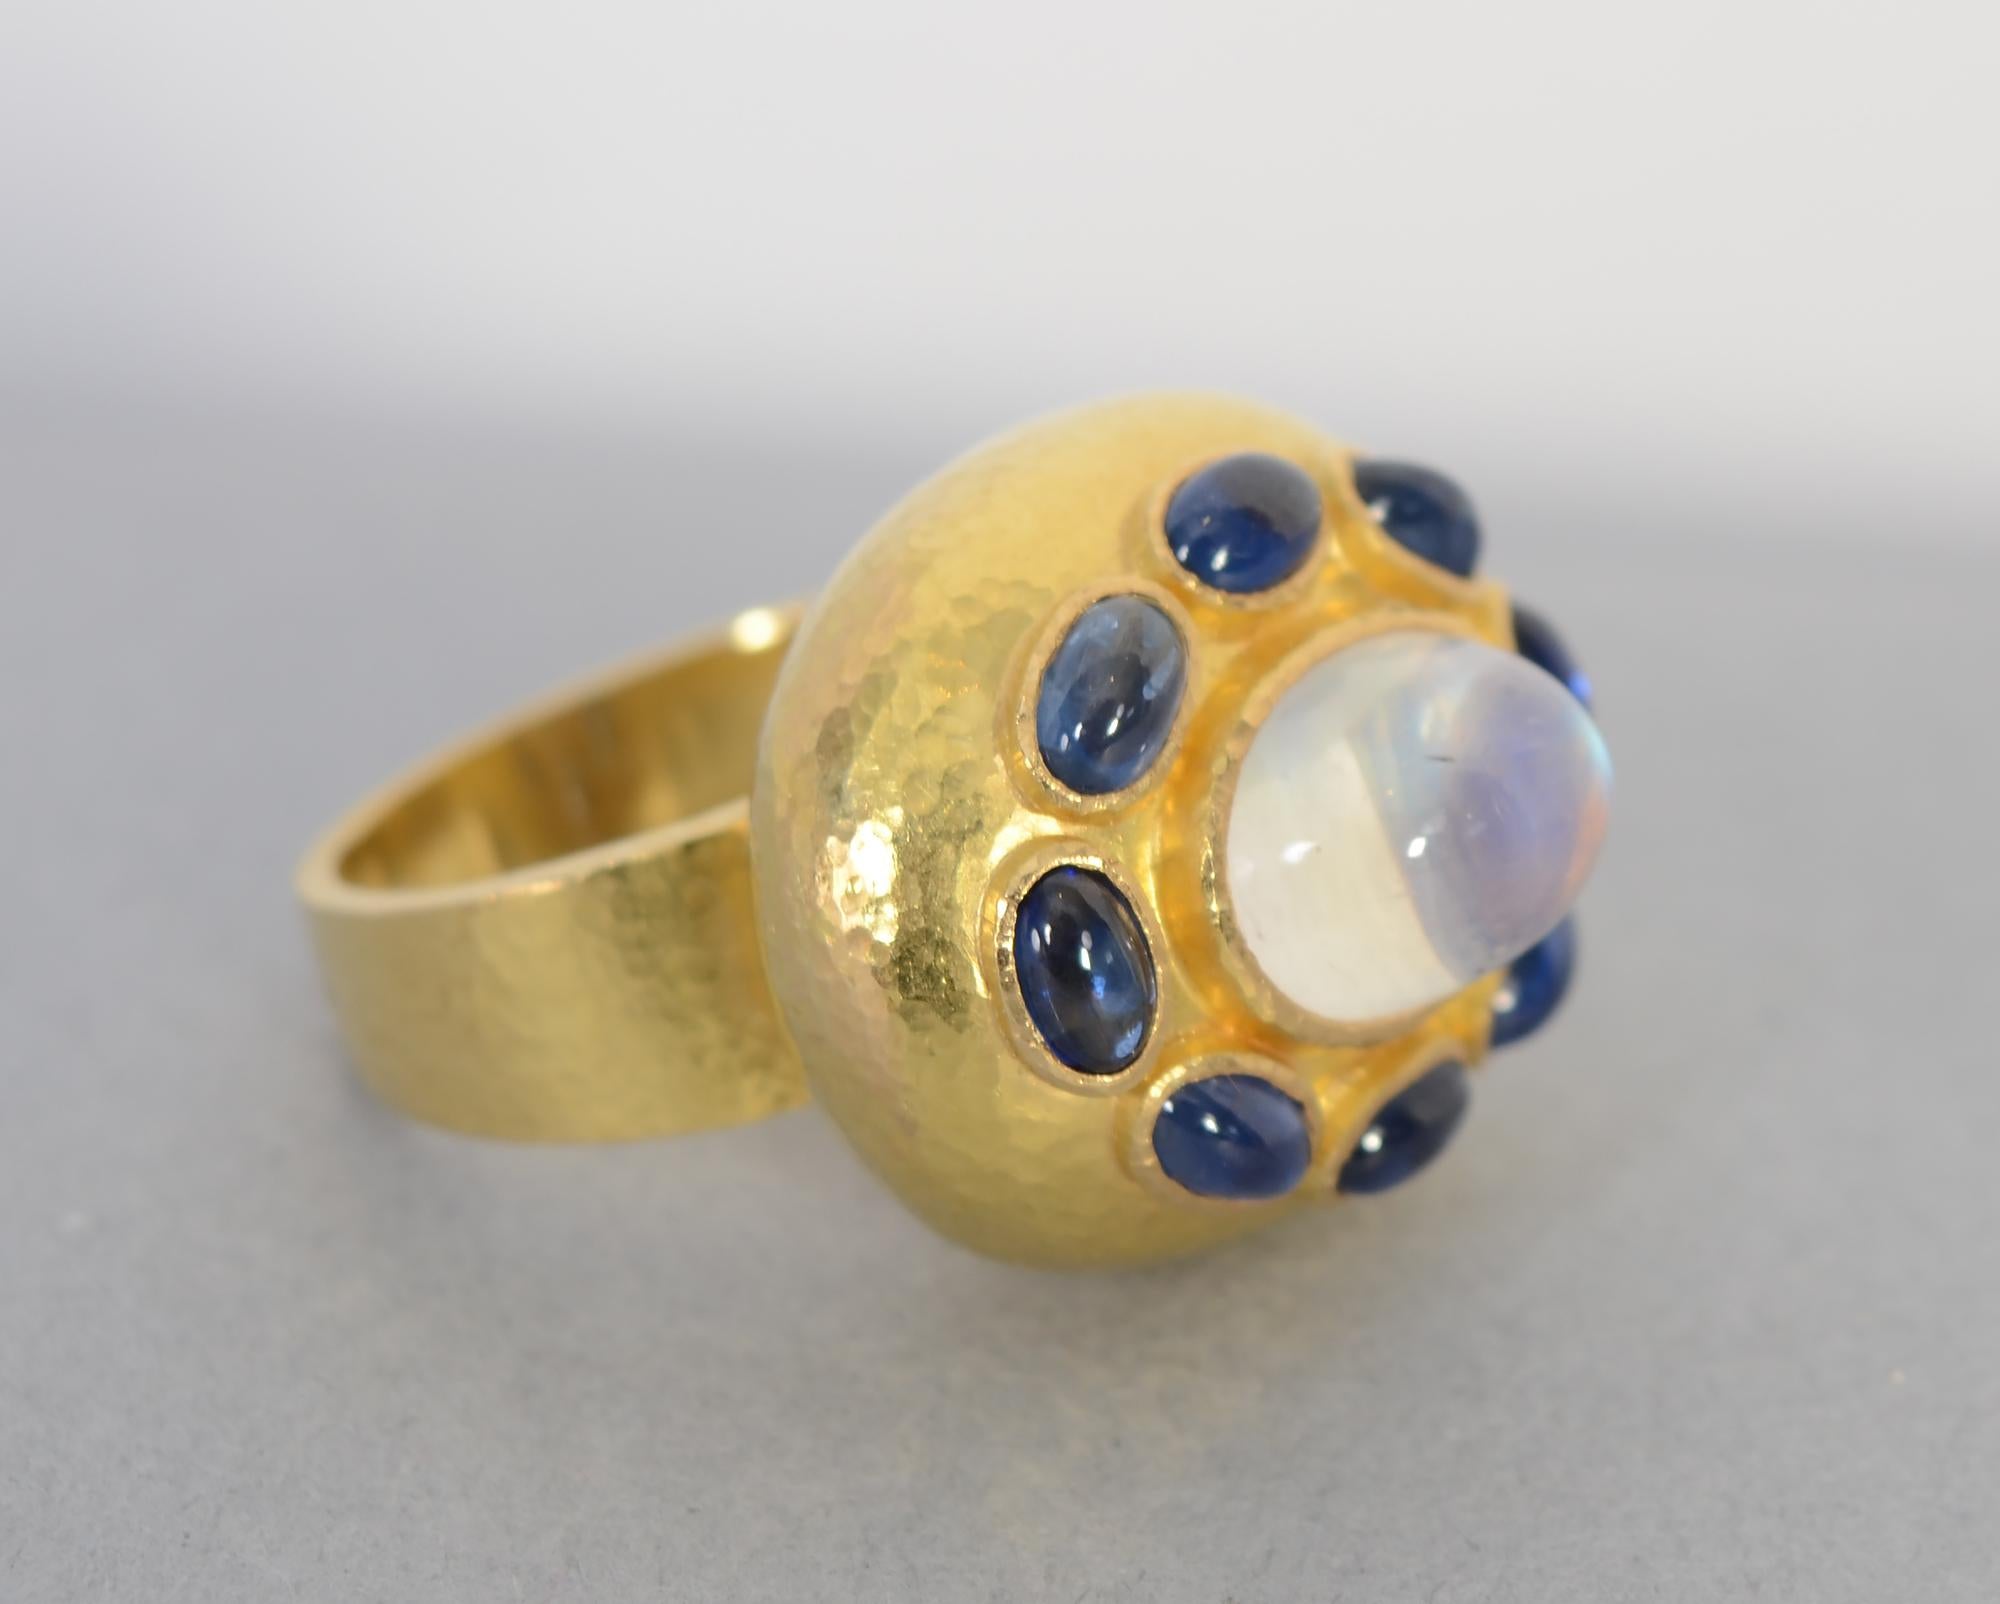 Elegant, restrained moonstone and sapphire ring by Elizabeth Locke. The center stone is a 4.15 carat oval, domed moonstone. It is surrounded by 8 oval sapphires . They are all set on a hammered gold oval cushion. The ring is 19 karat gold, typical